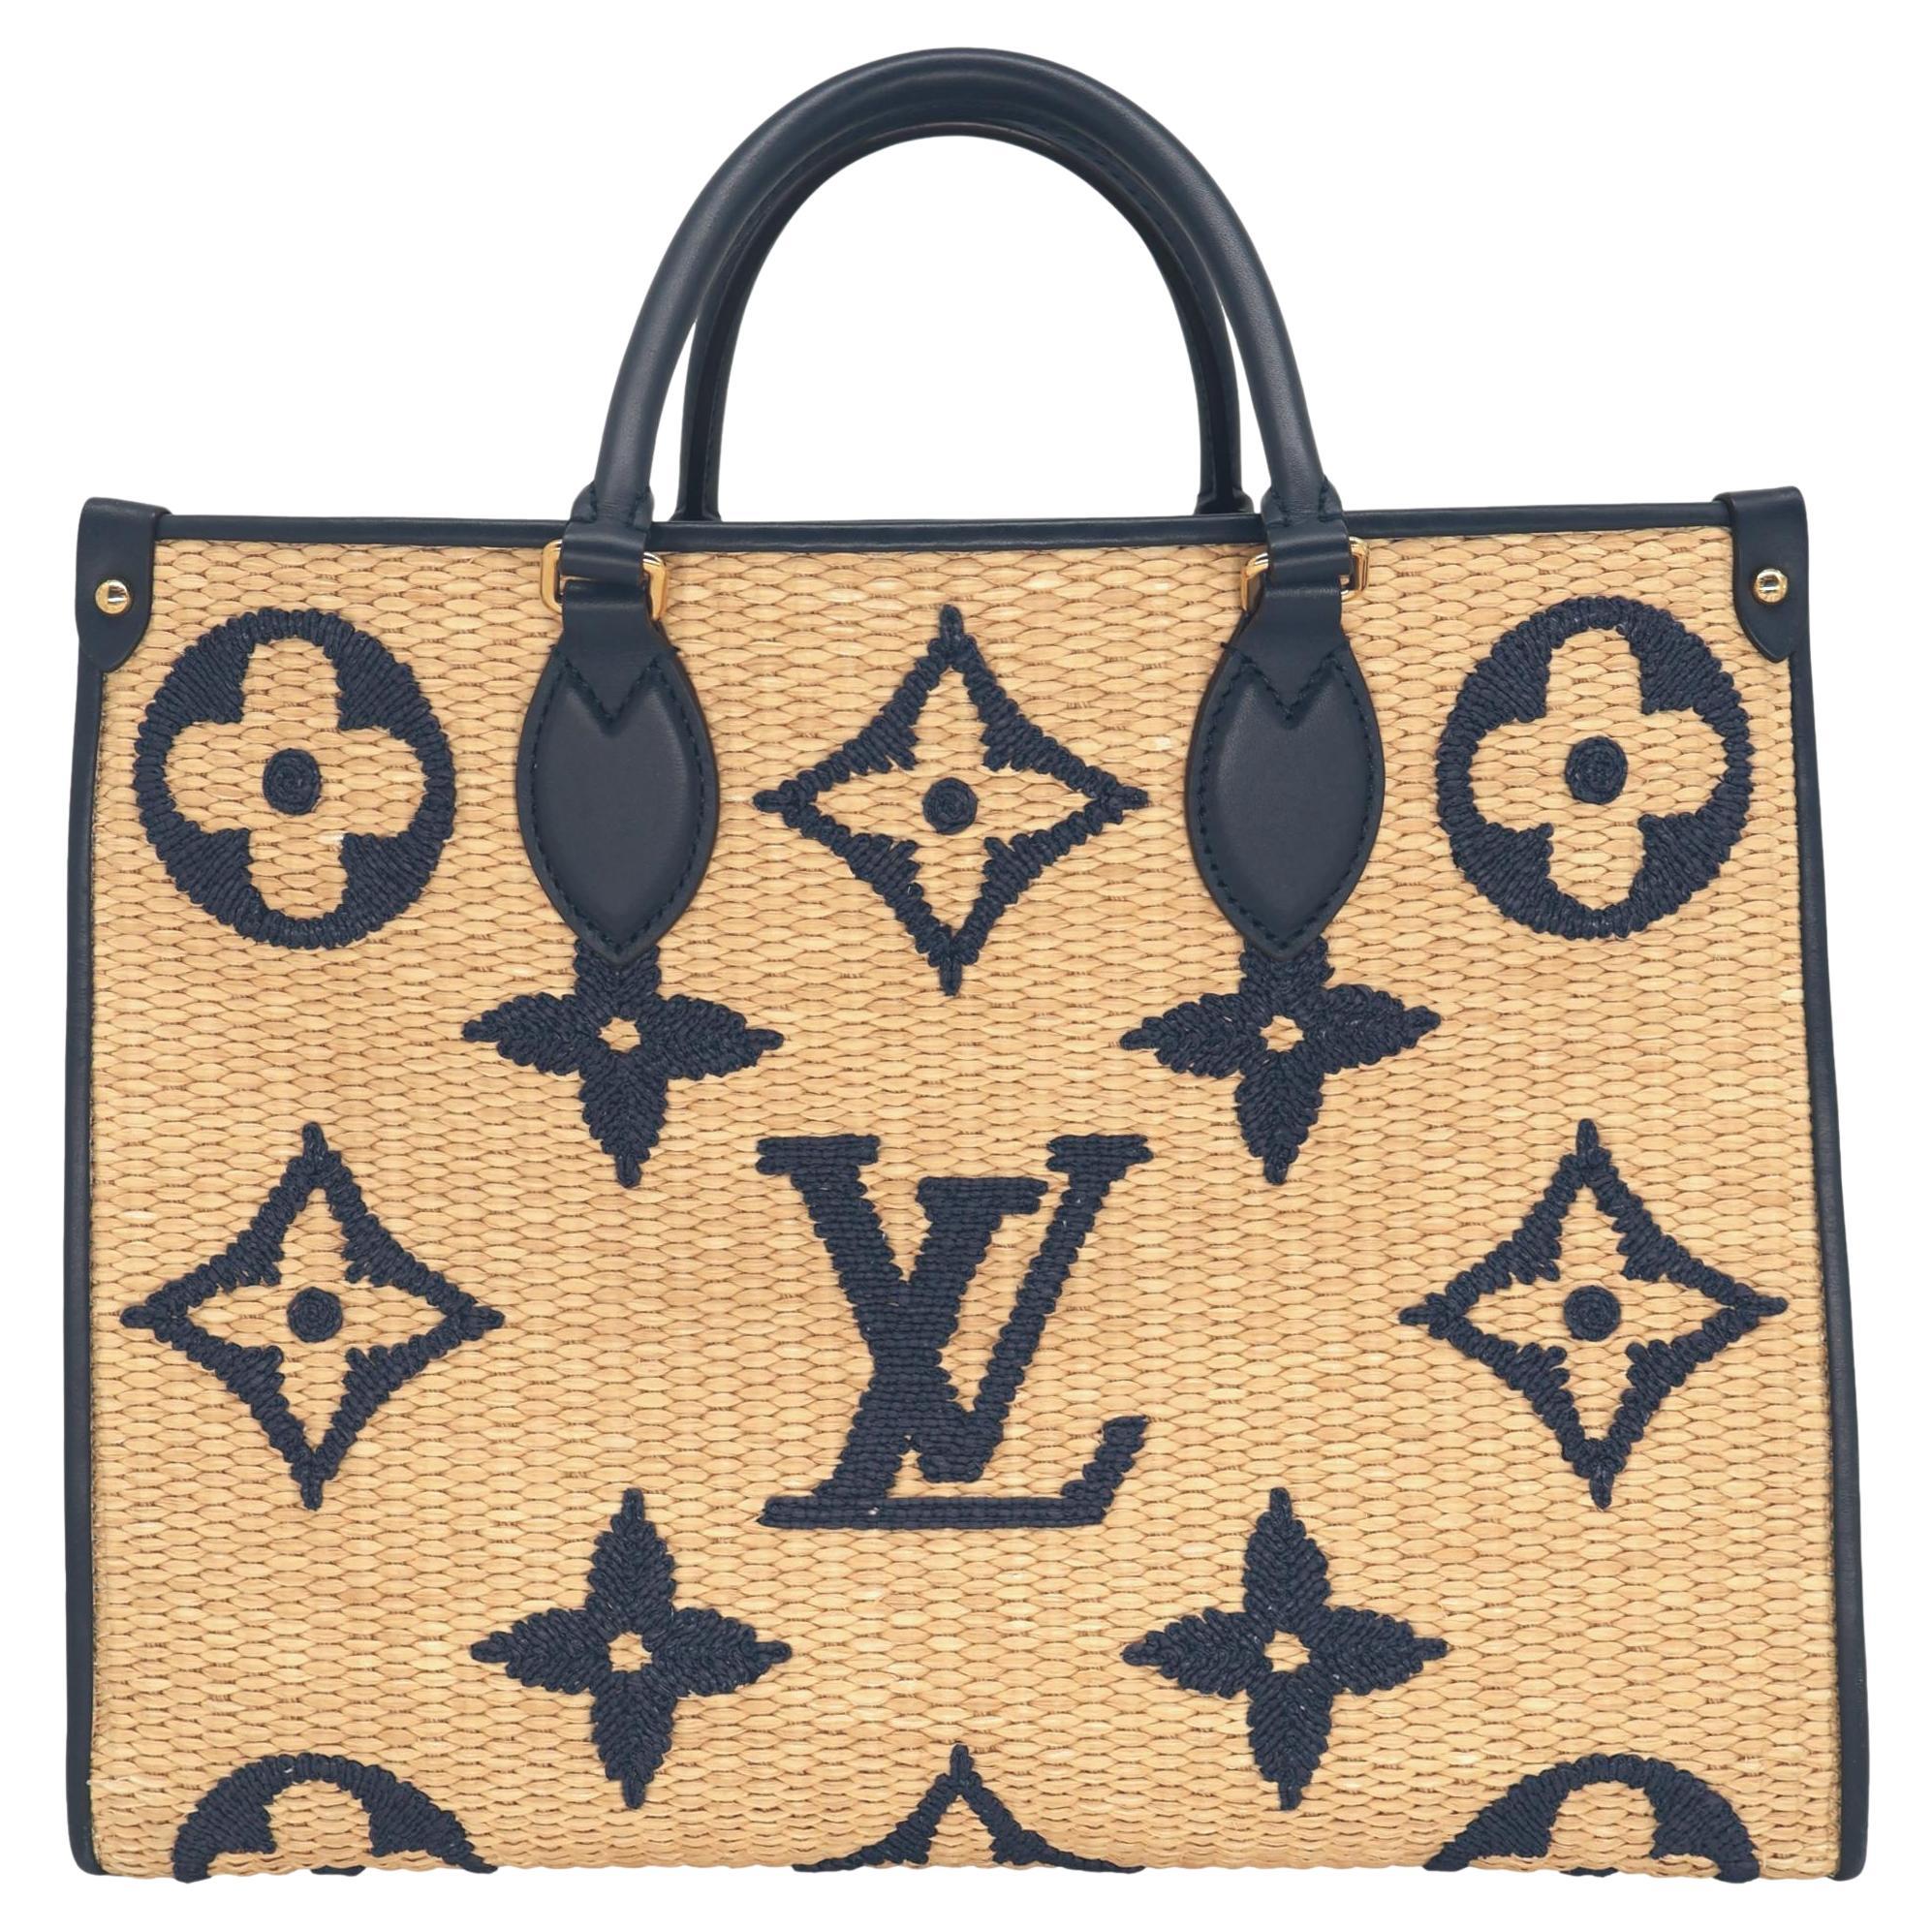 What is the Louis Vuitton flower called?